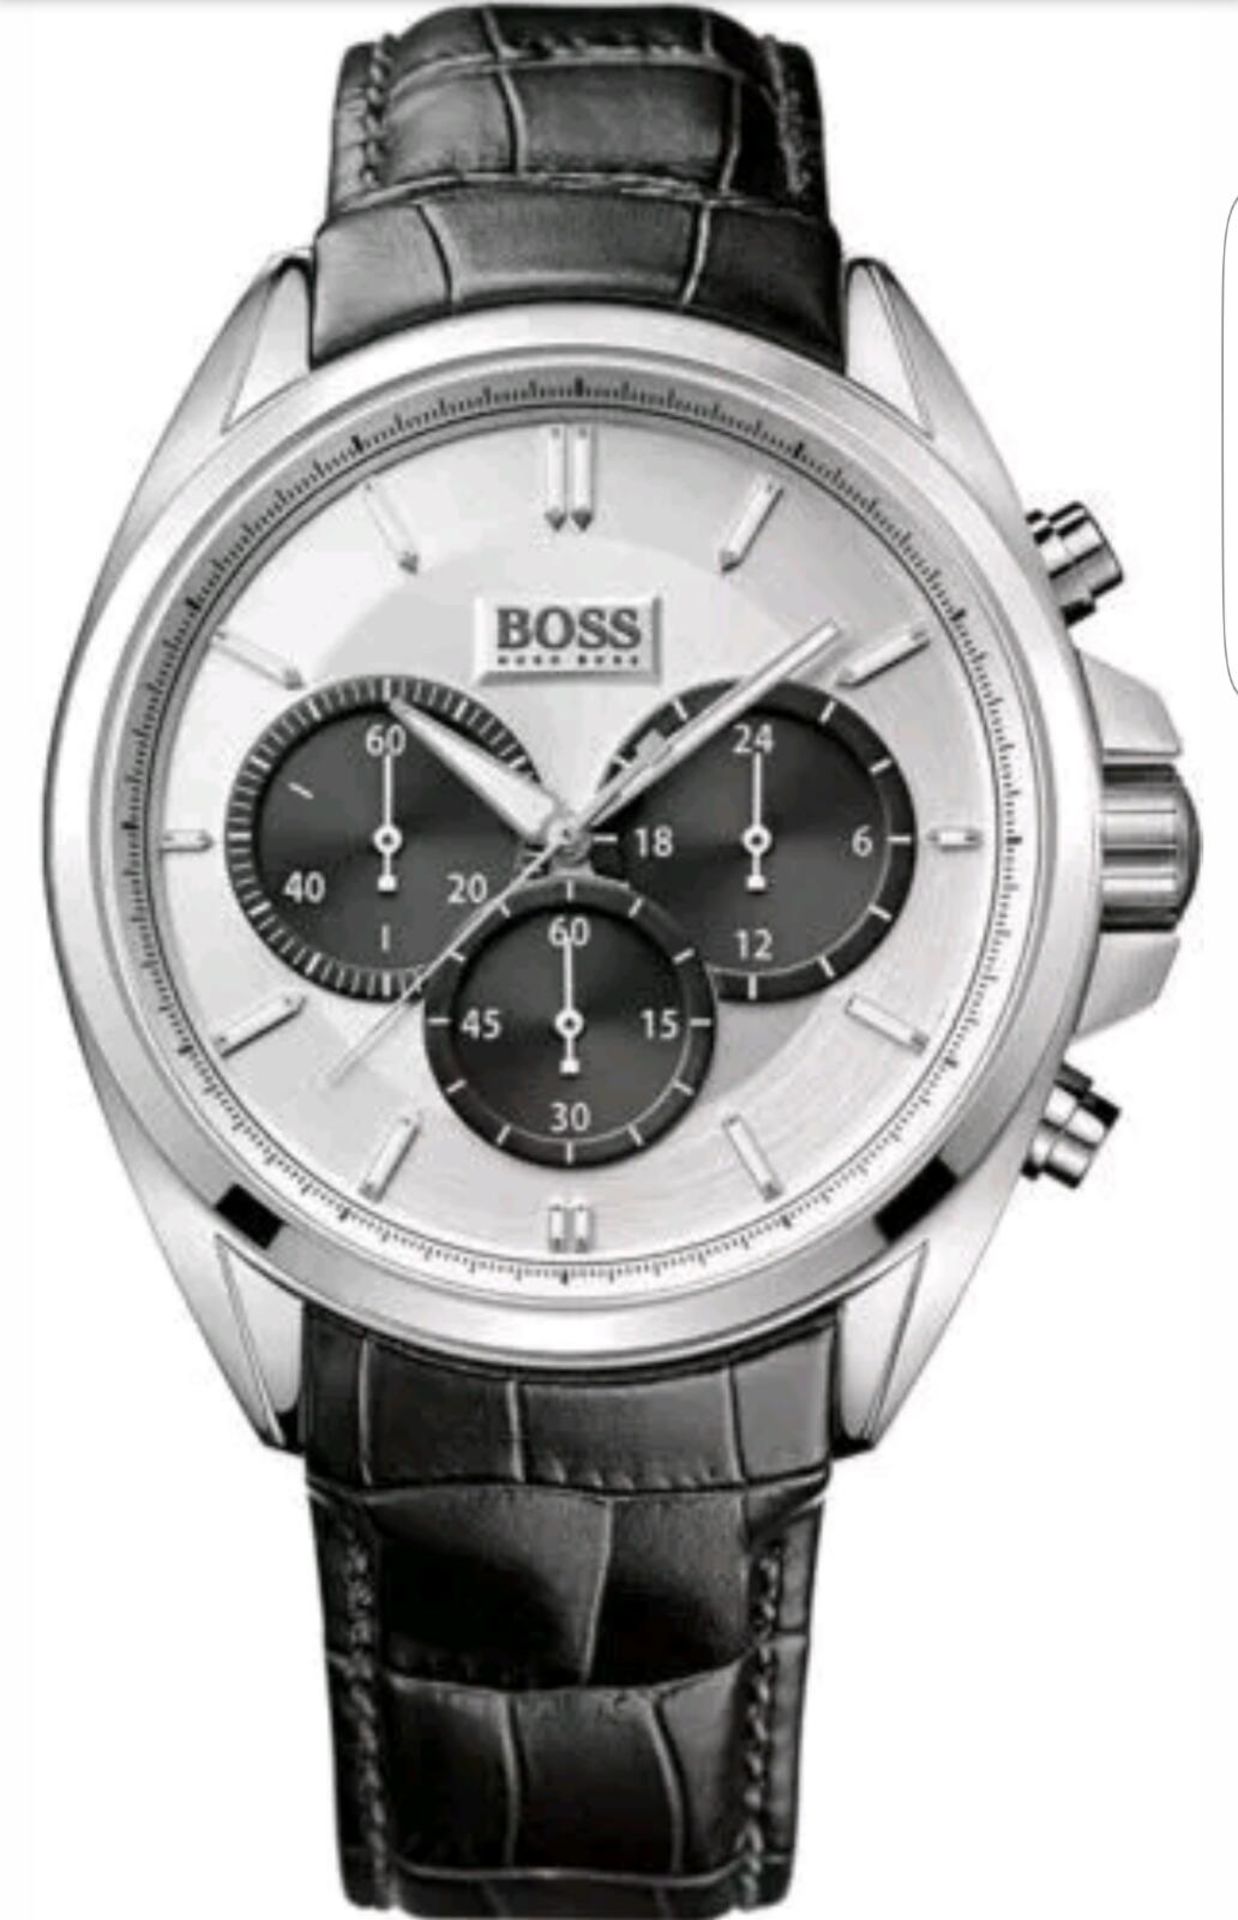 BRAND NEW GENTS HUGO BOSS WATCH, HB1512880, COMPLETE WITH ORIGINAL BOX AND MANUAL - RRP £399